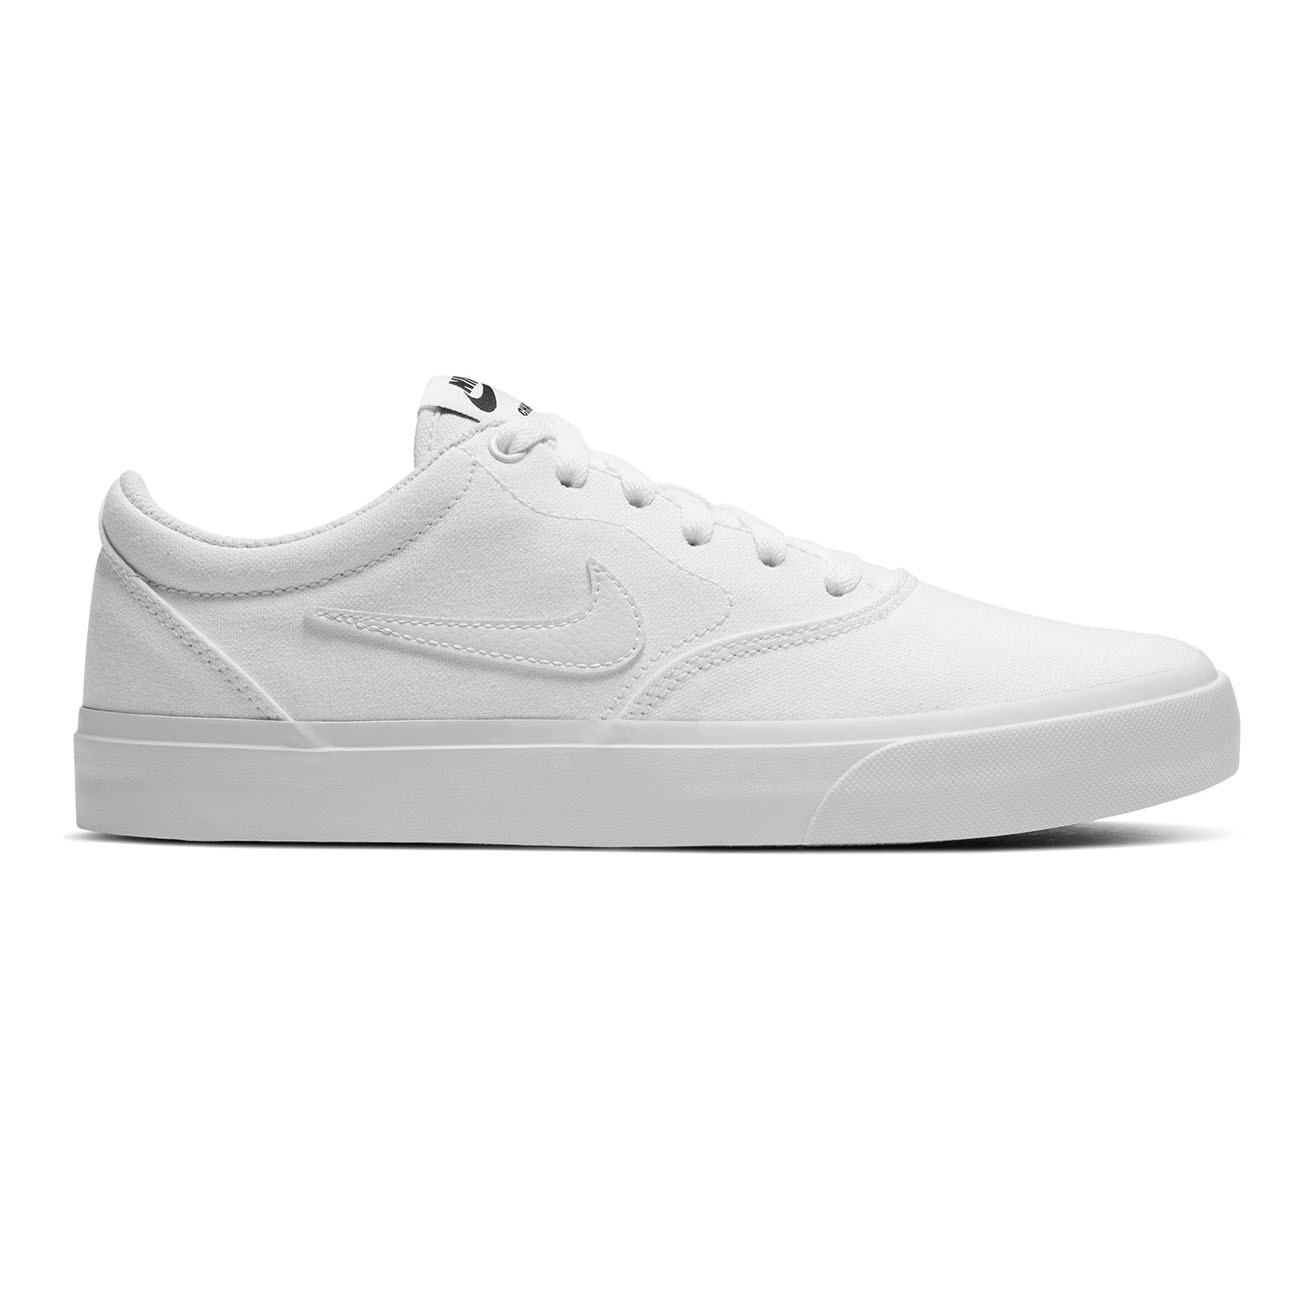 Sneakers Nike SB Wms Charge Canvas 